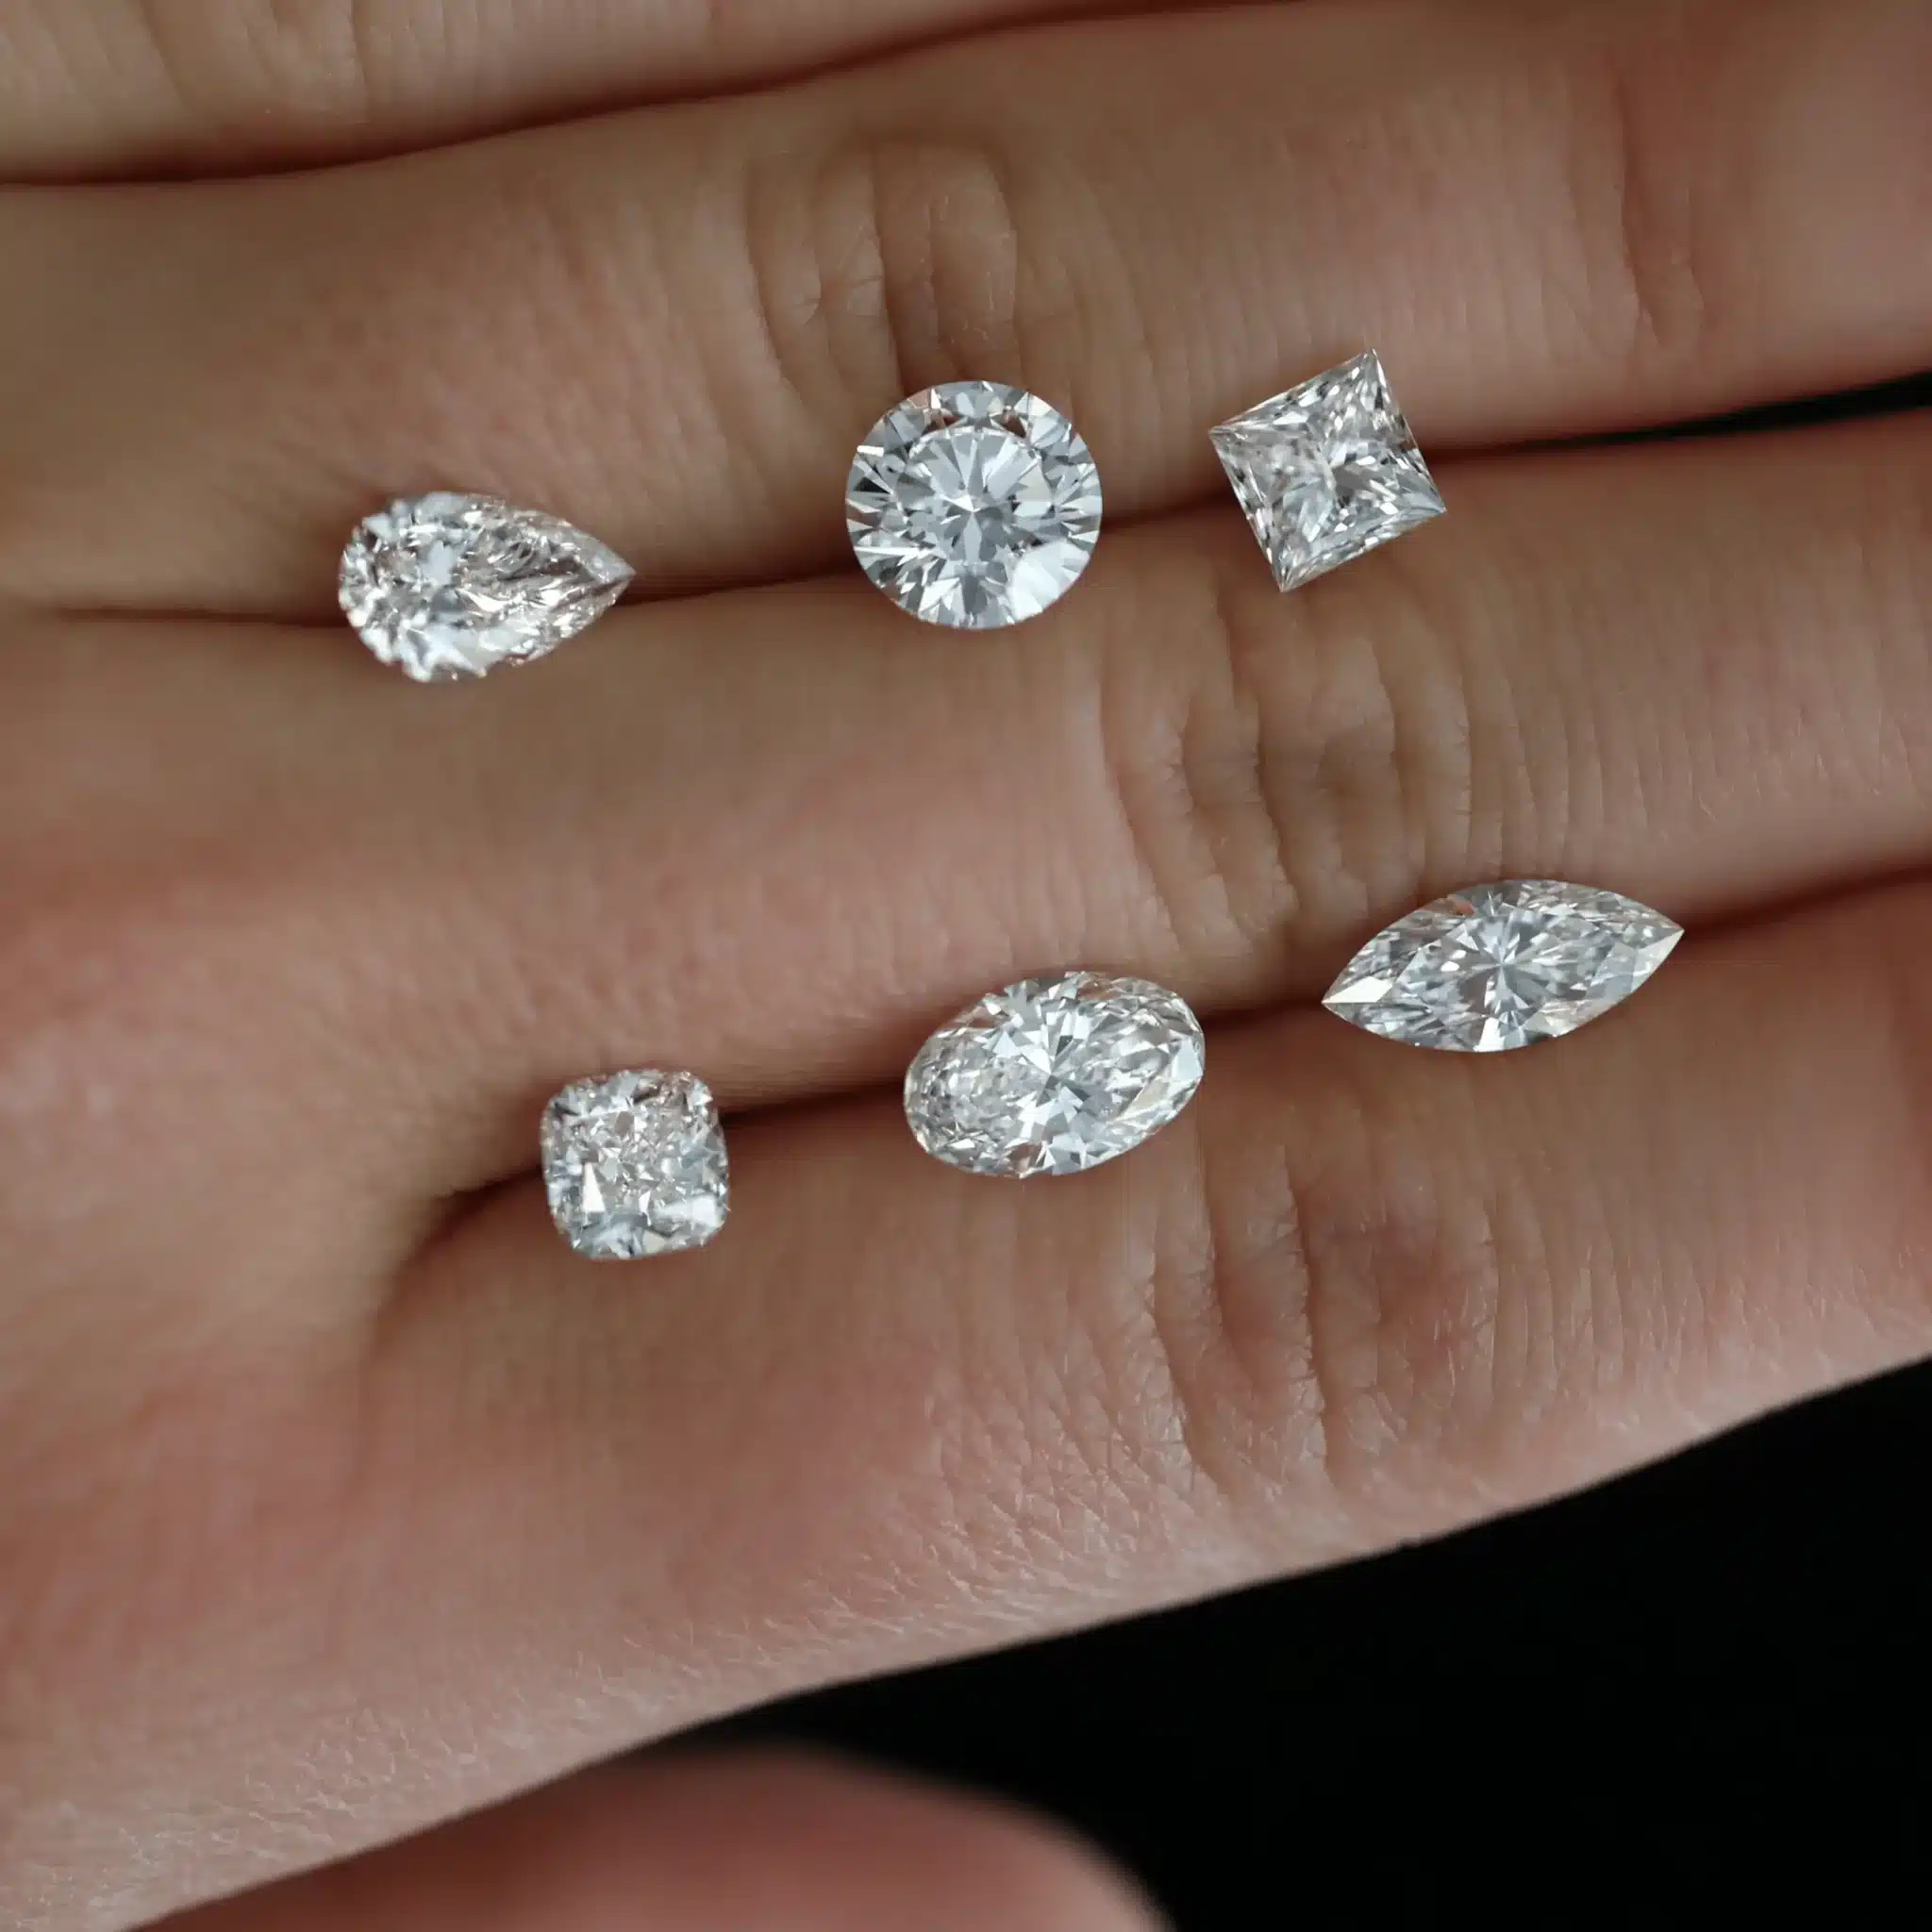 Diamond shapes & cuts for engagement rings